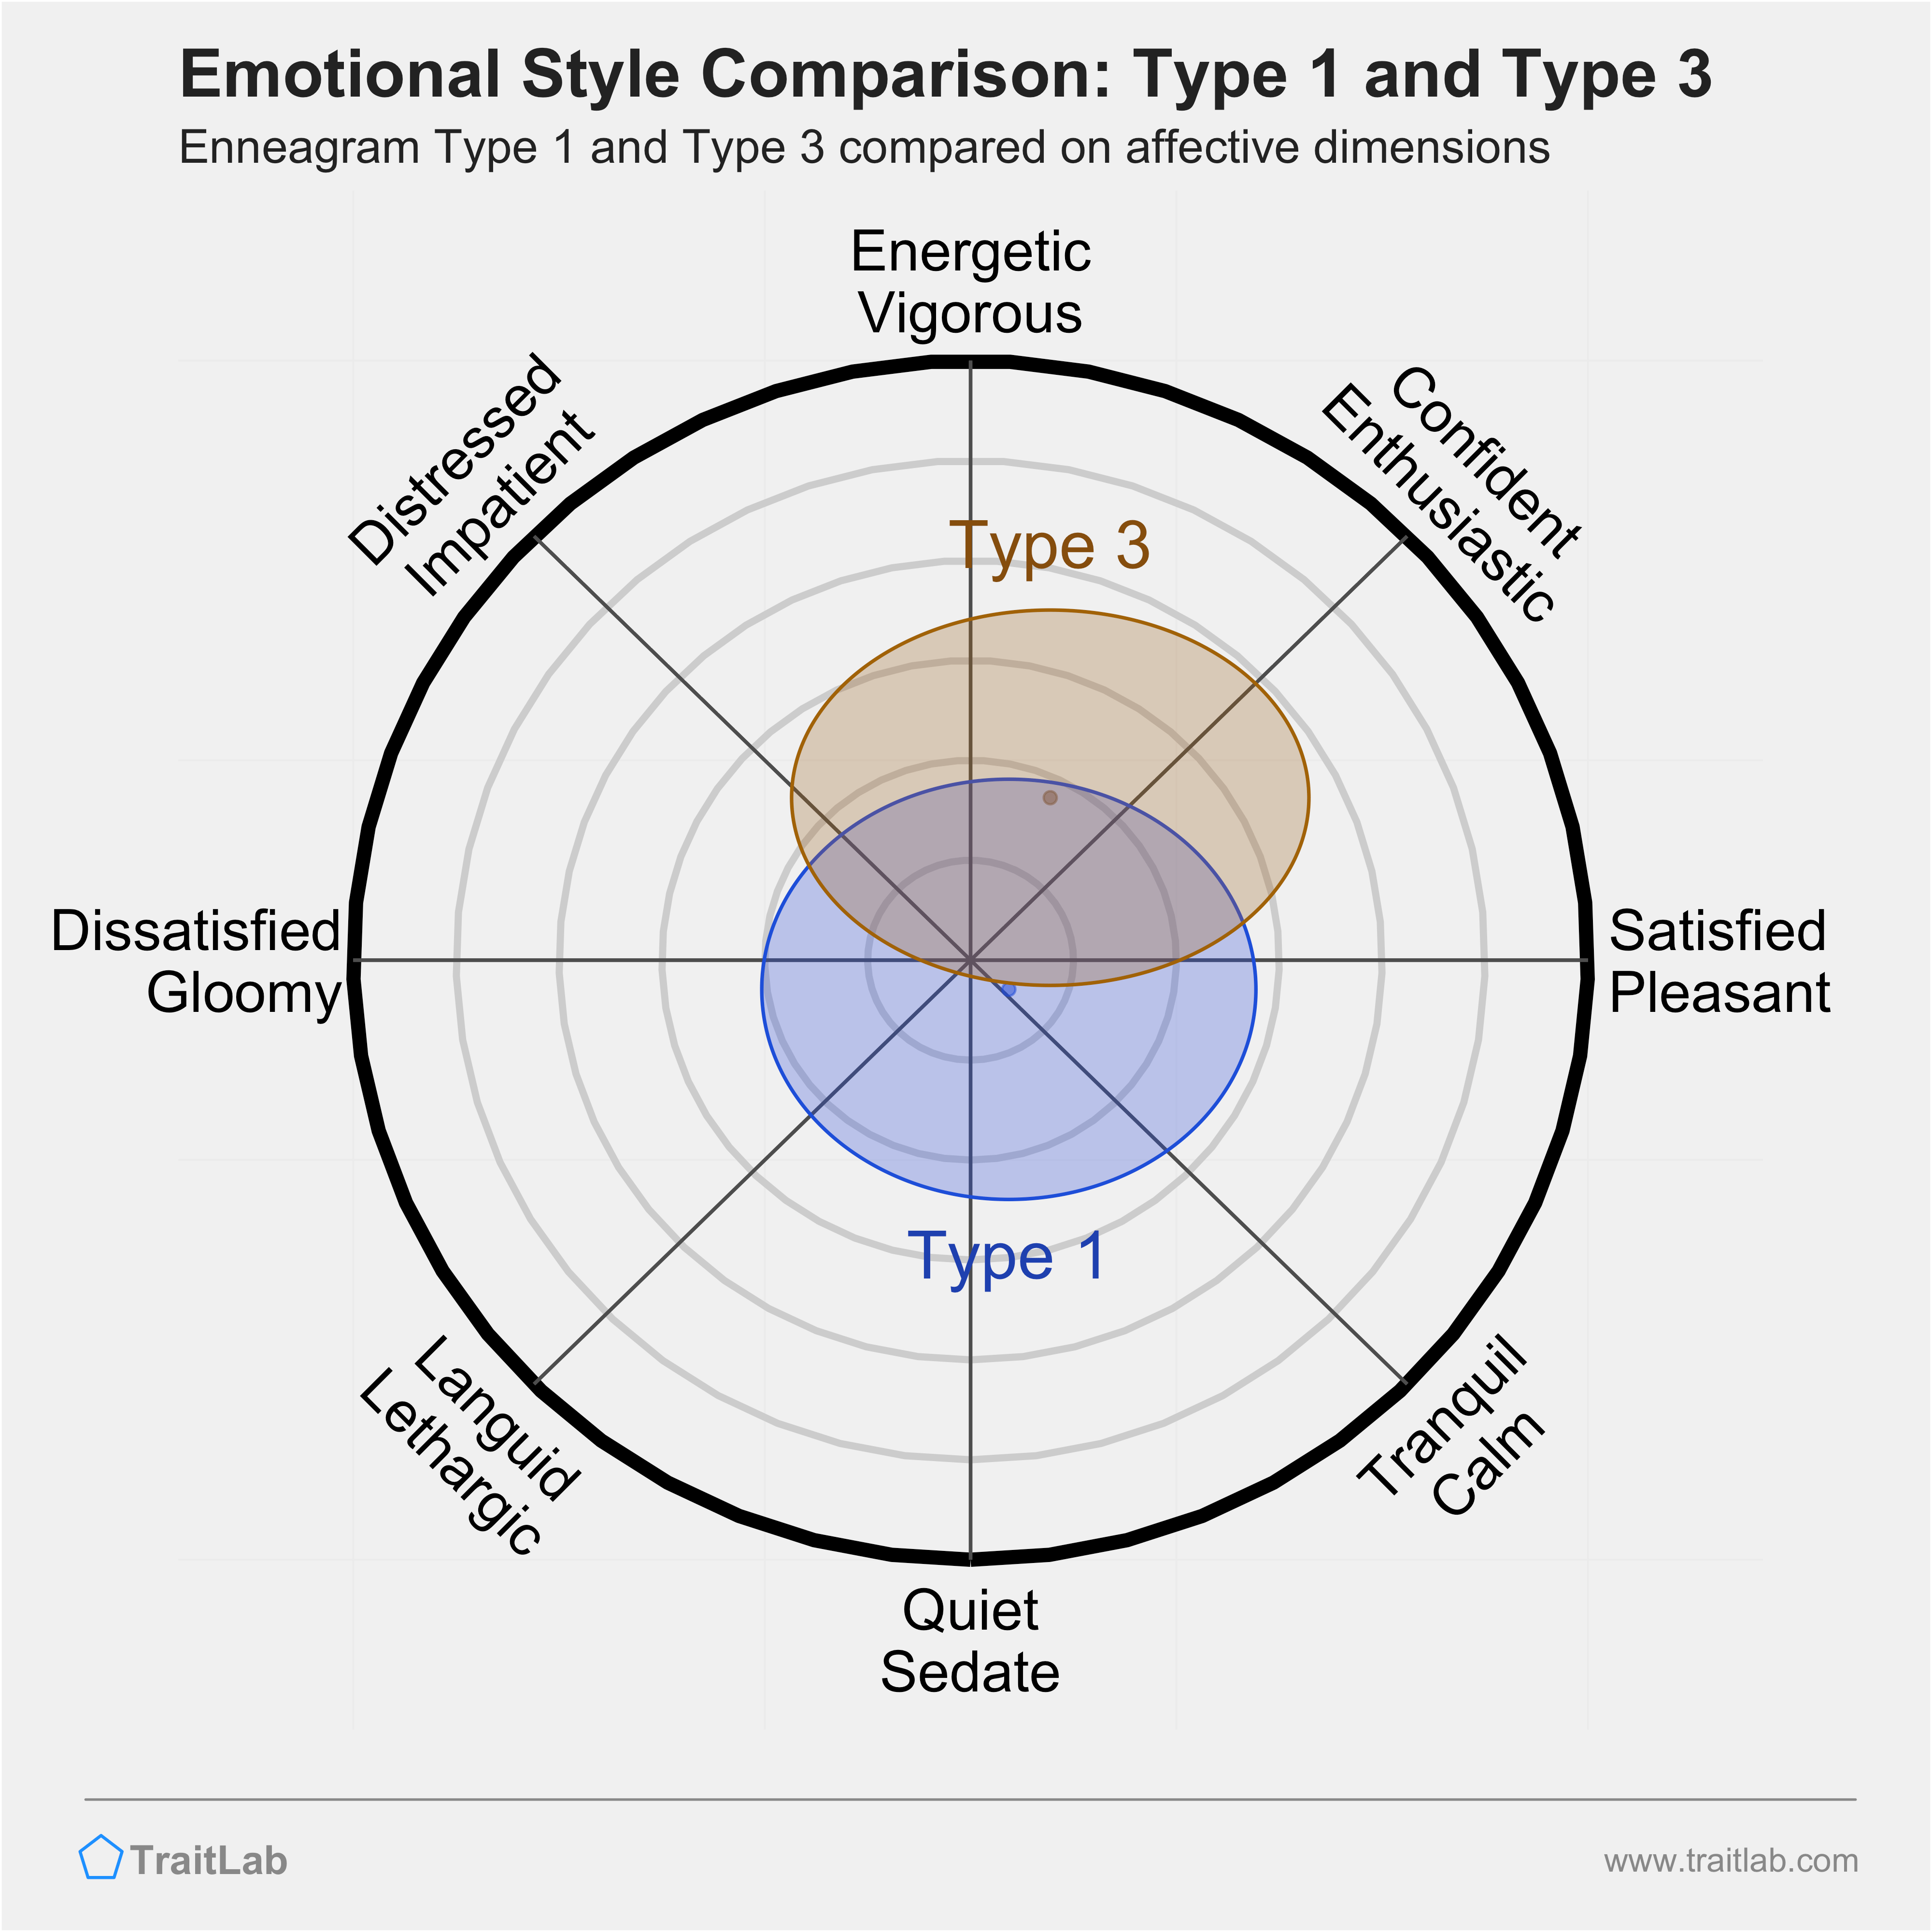 Type 1 and Type 3 comparison across emotional (affective) dimensions